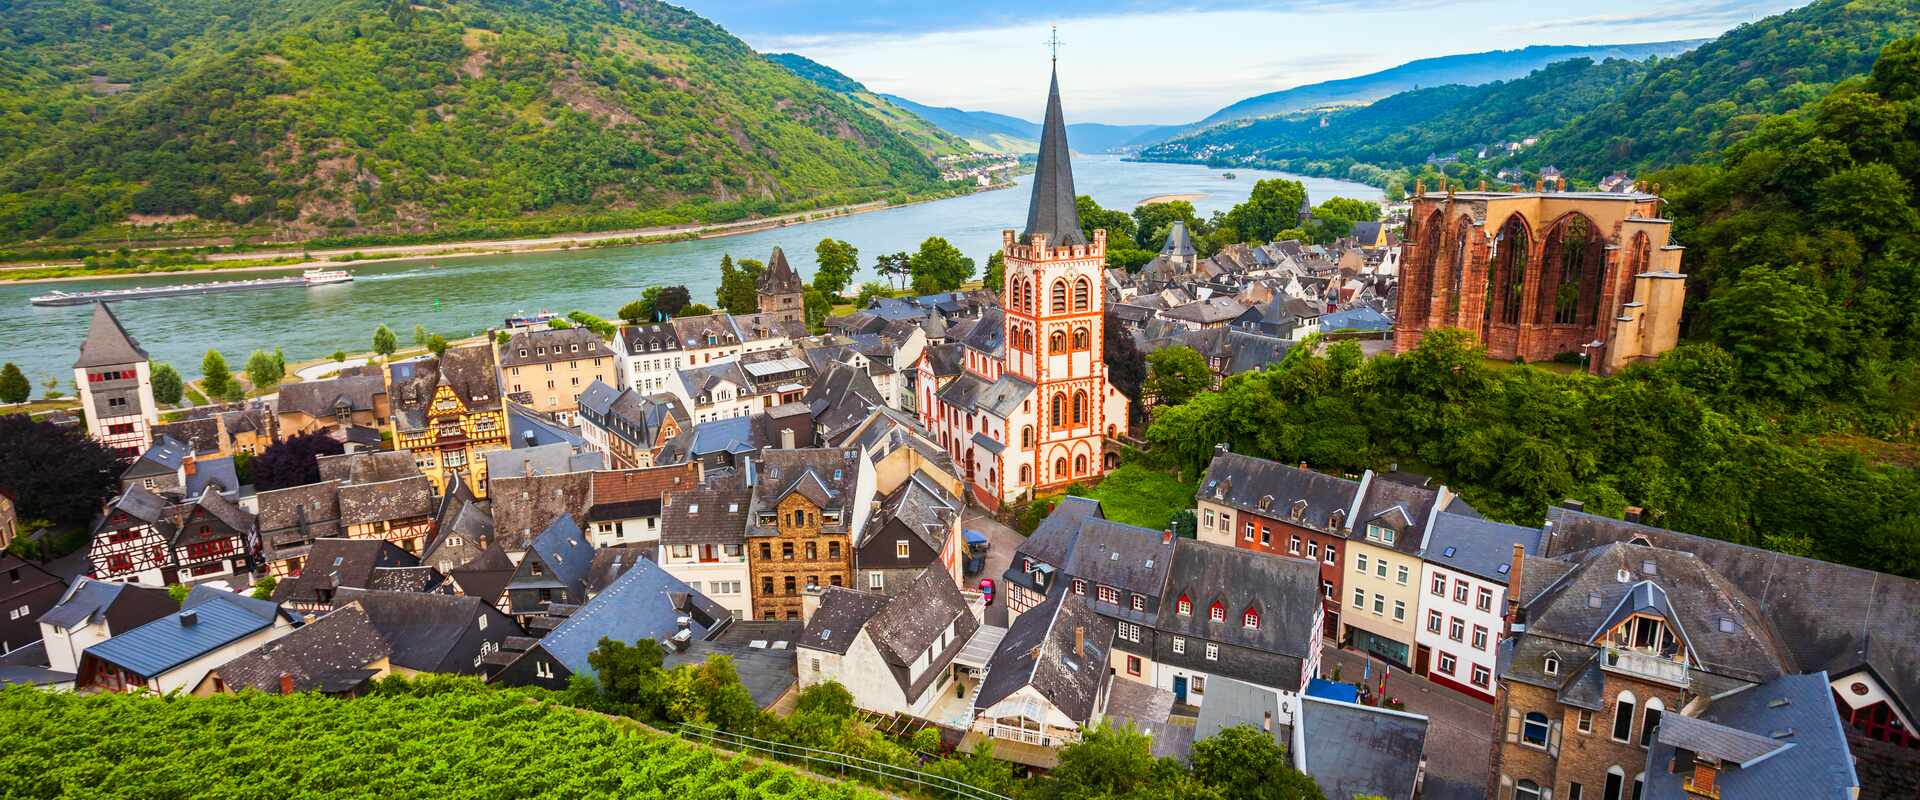 The quaint town of Bacharach in the Rhine Valley, Germany